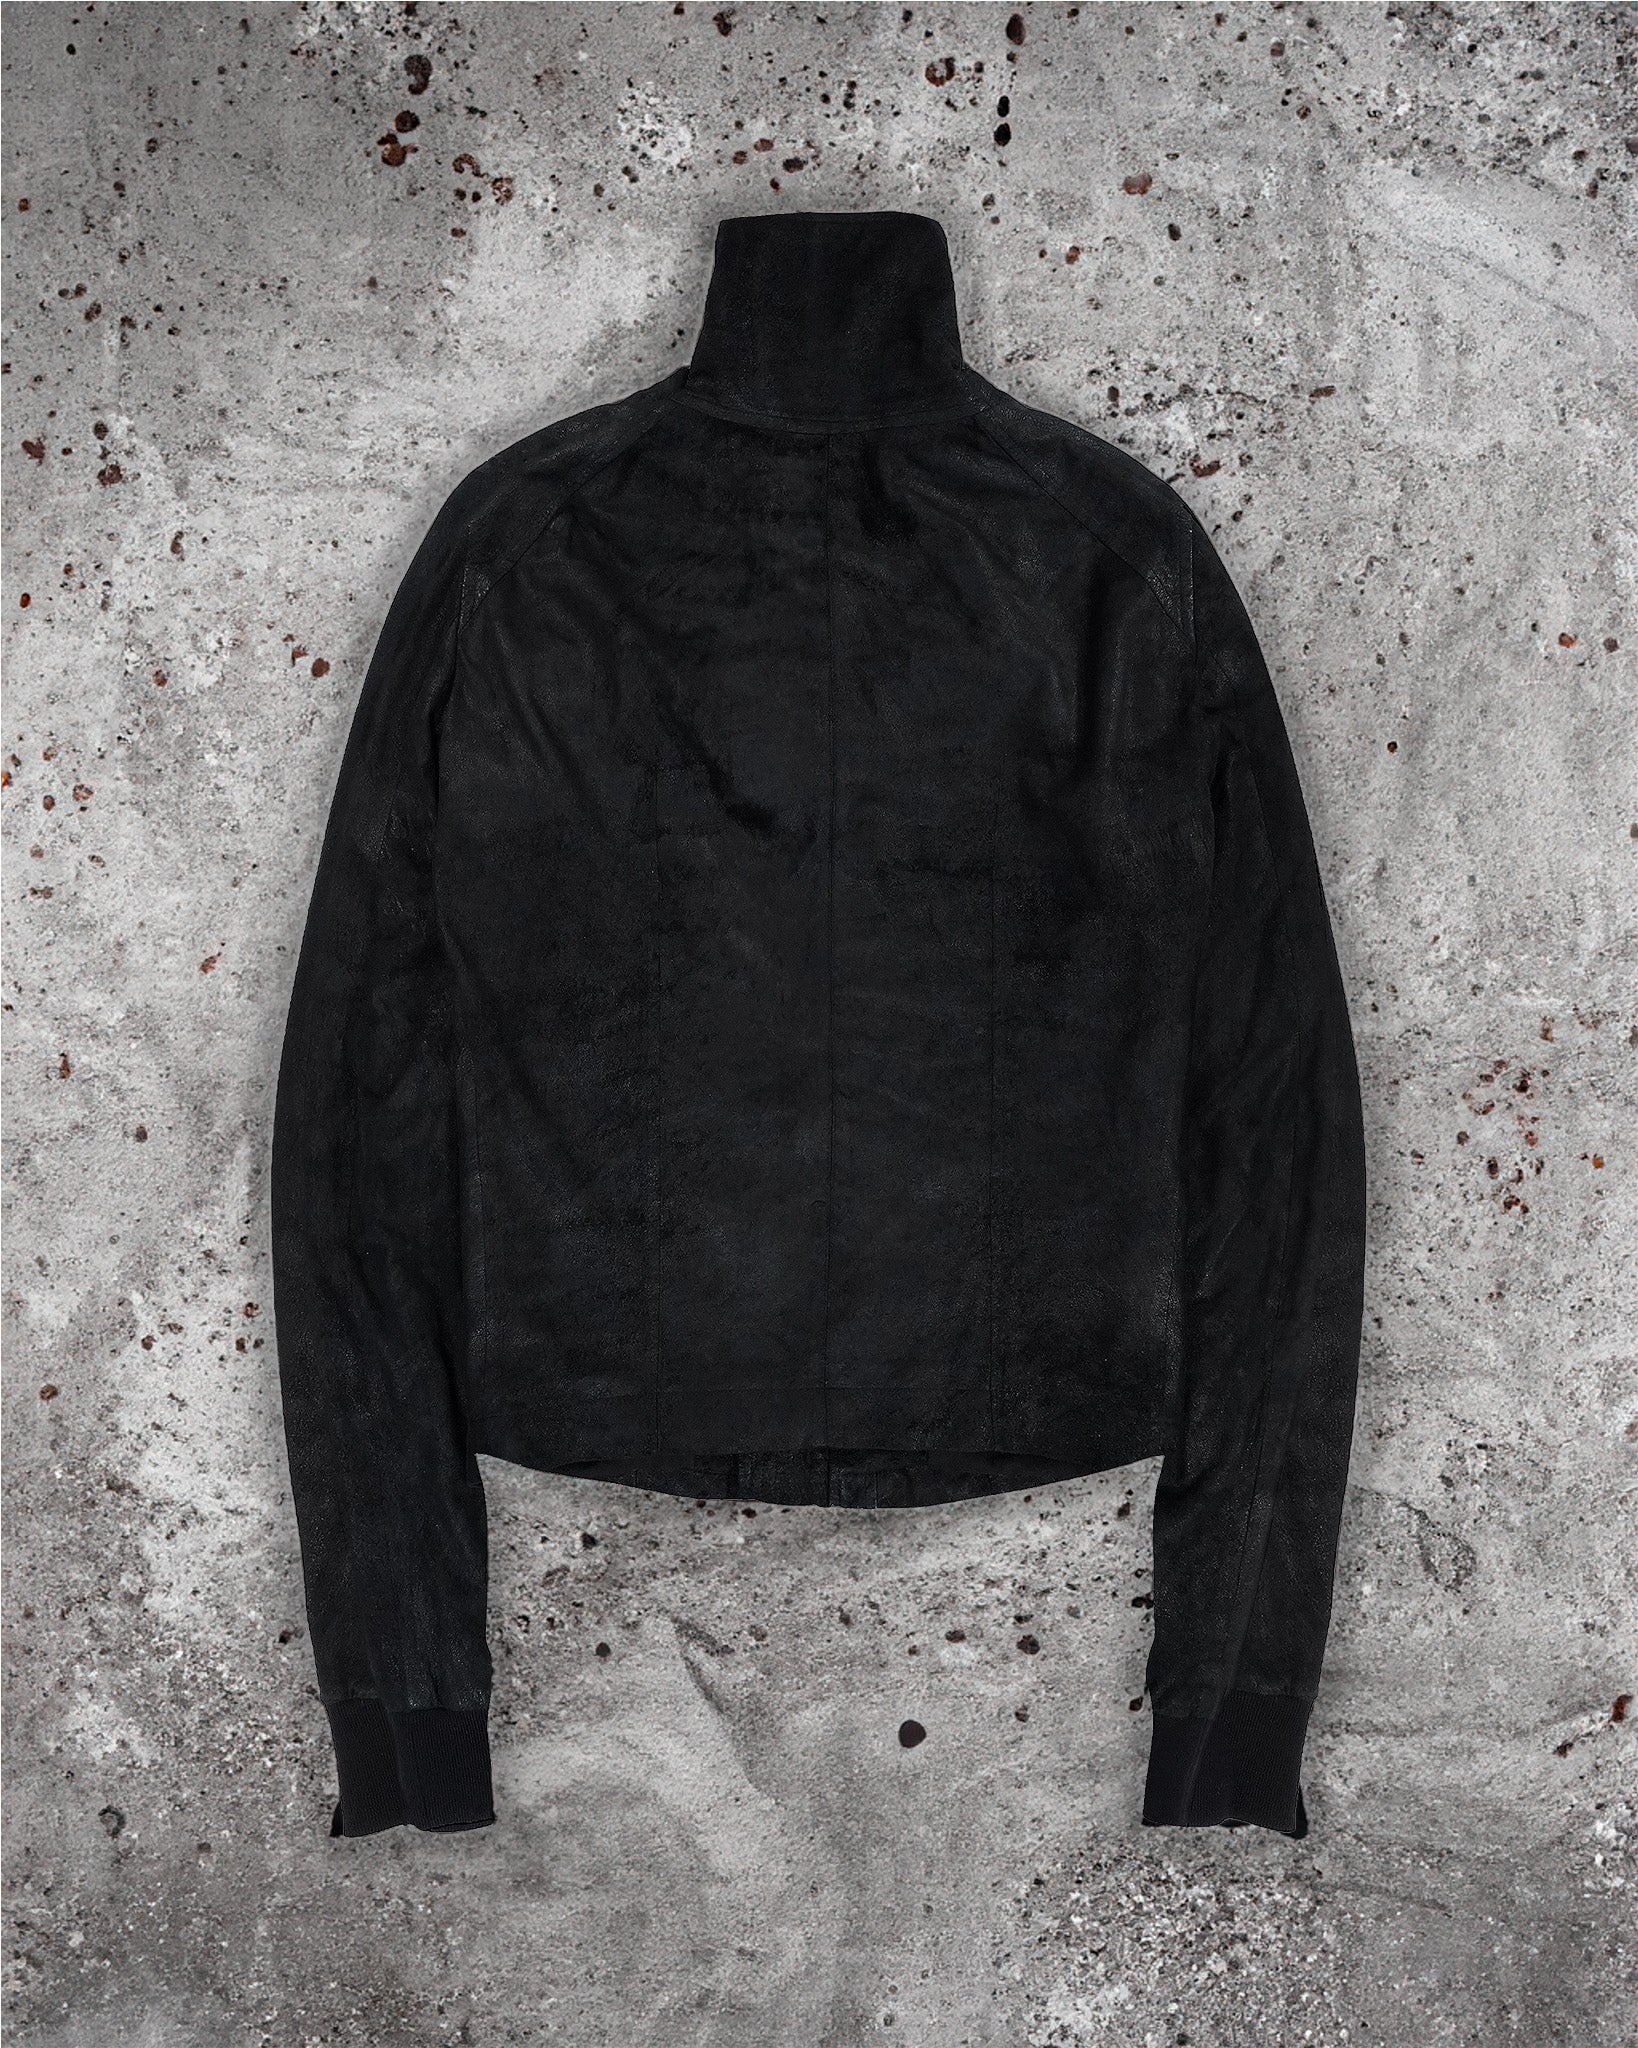 Rick Owens “Blistered” Leather Jacket - FW11 “Limo” – DARKARCHIVE NYC